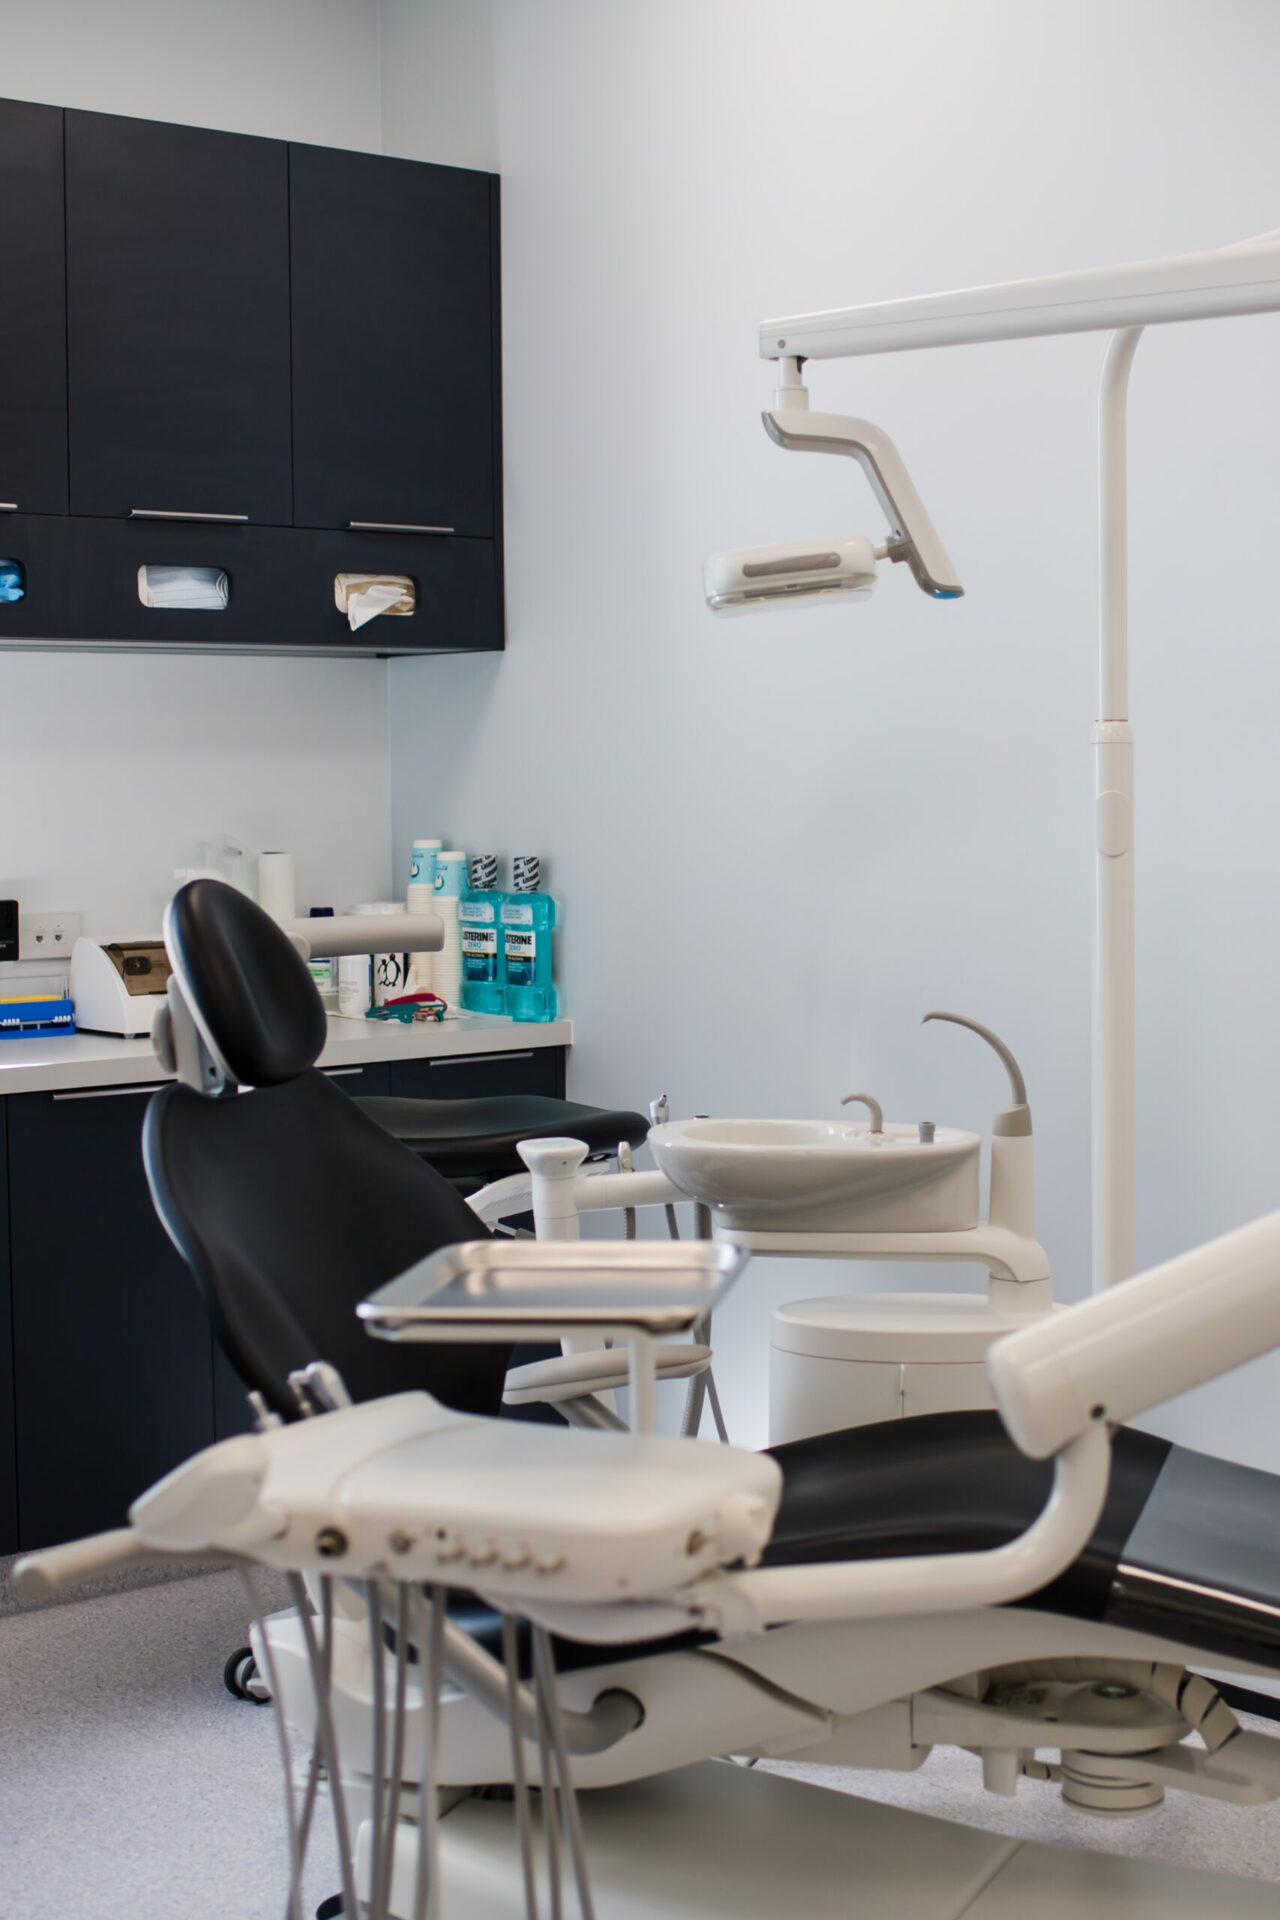 TURNKEY DENTAL FIT-OUT